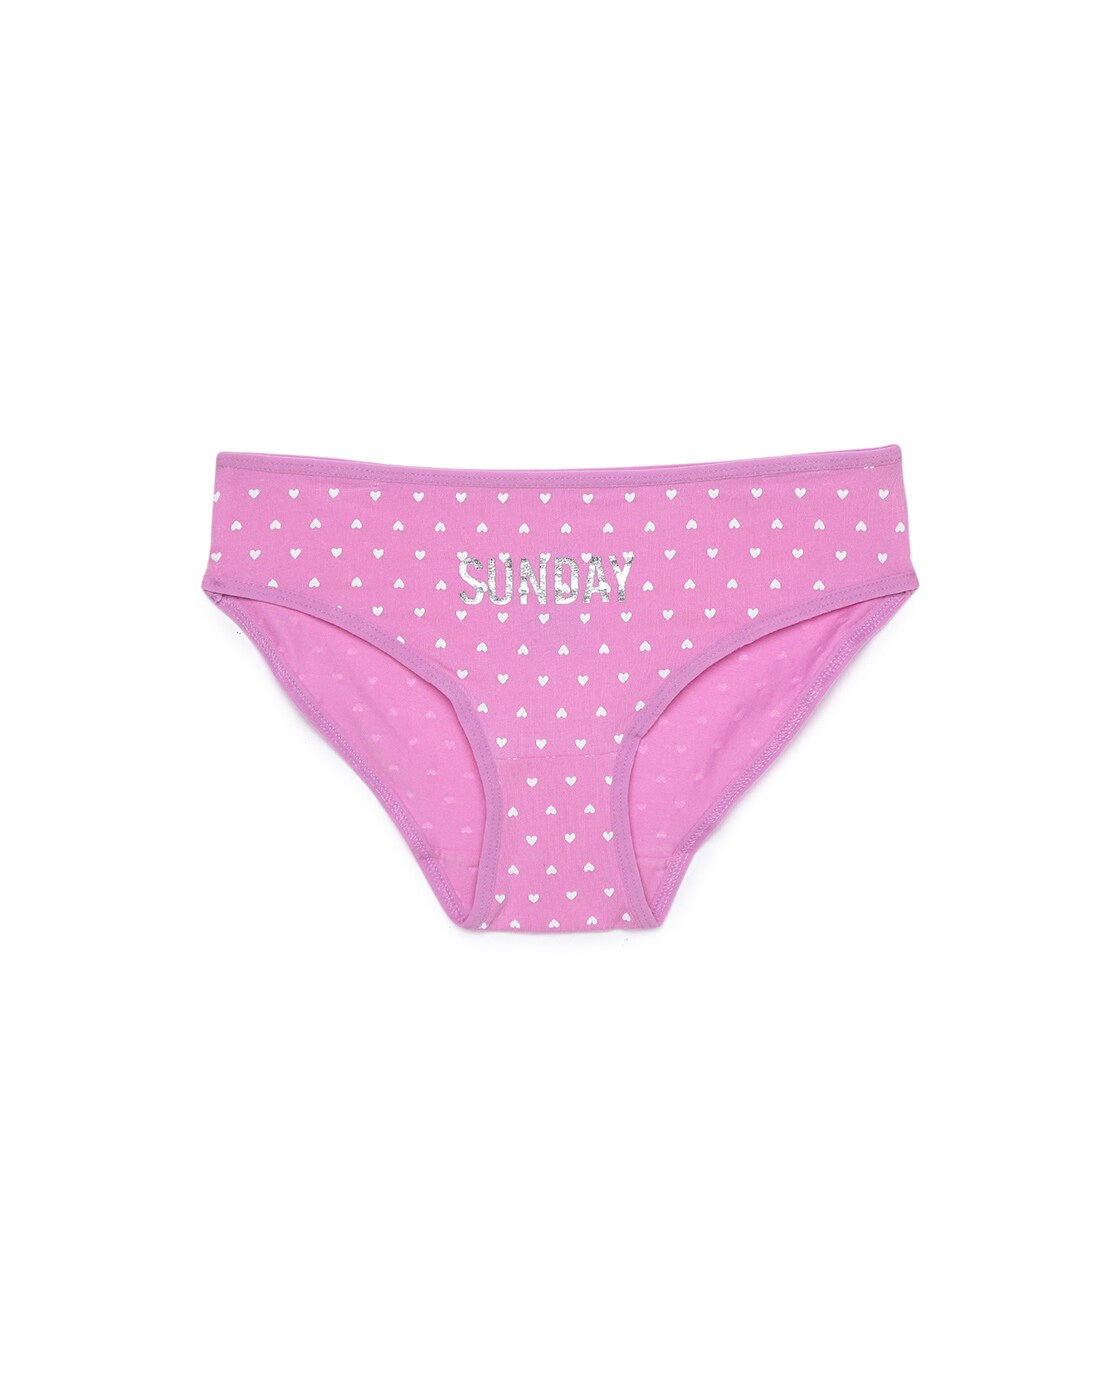 Shop Girl MULTI1 Toddler Heart and Stripe Print Briefs (7-Pack